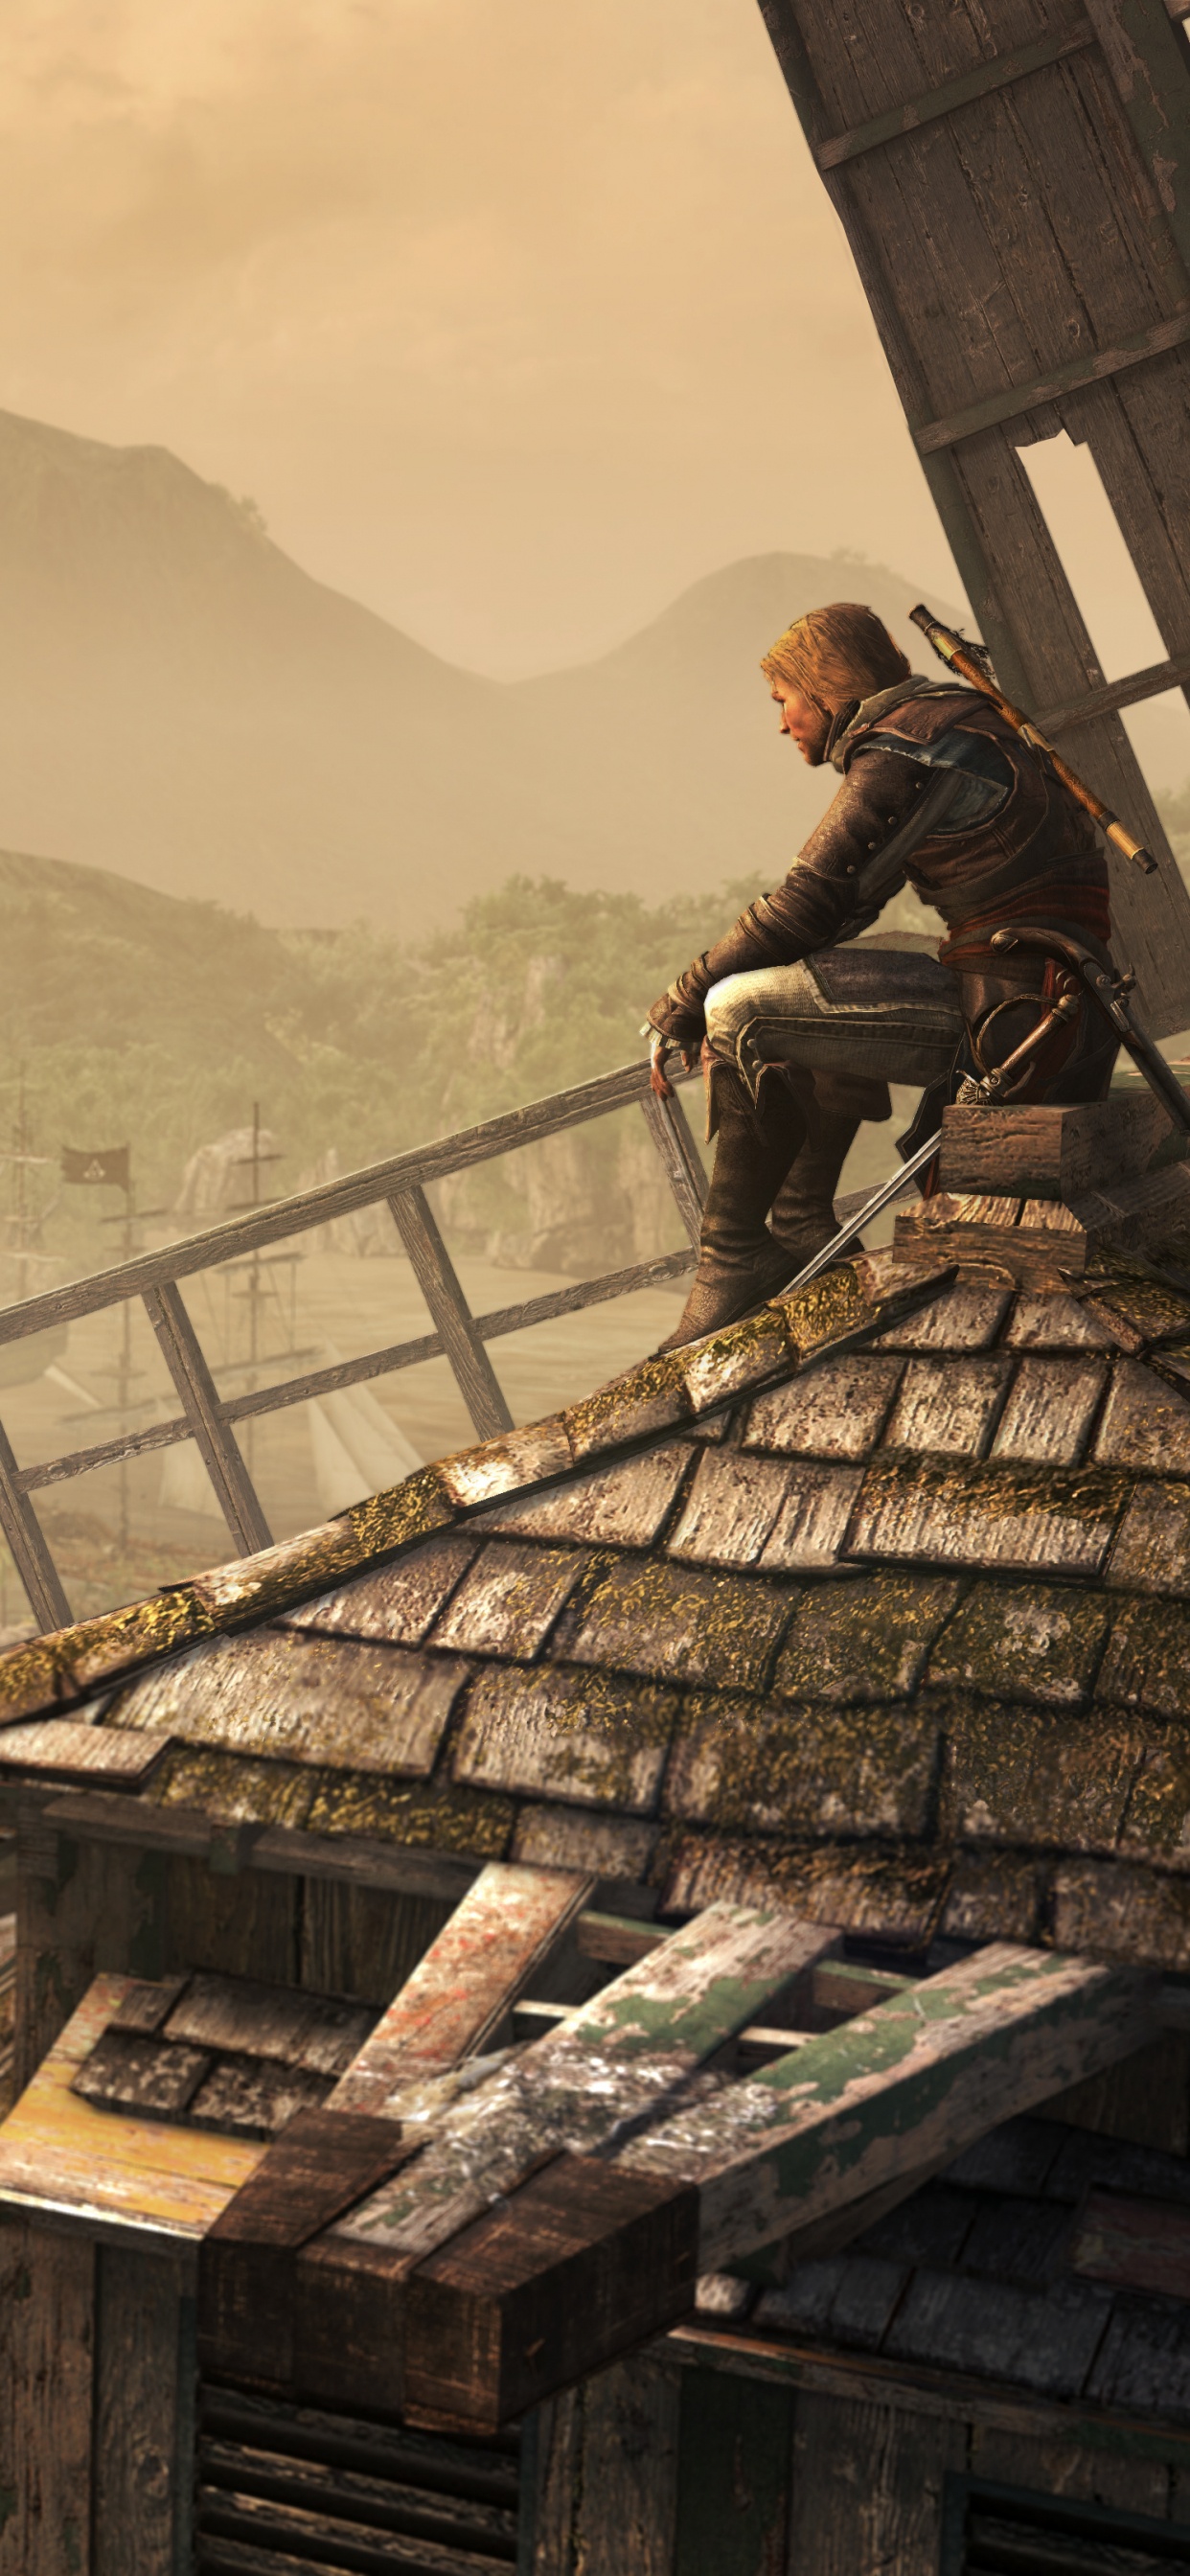 Assassins Creed III, Ubisoft, Edward Kenway, Playstation 3, pc Game. Wallpaper in 1242x2688 Resolution